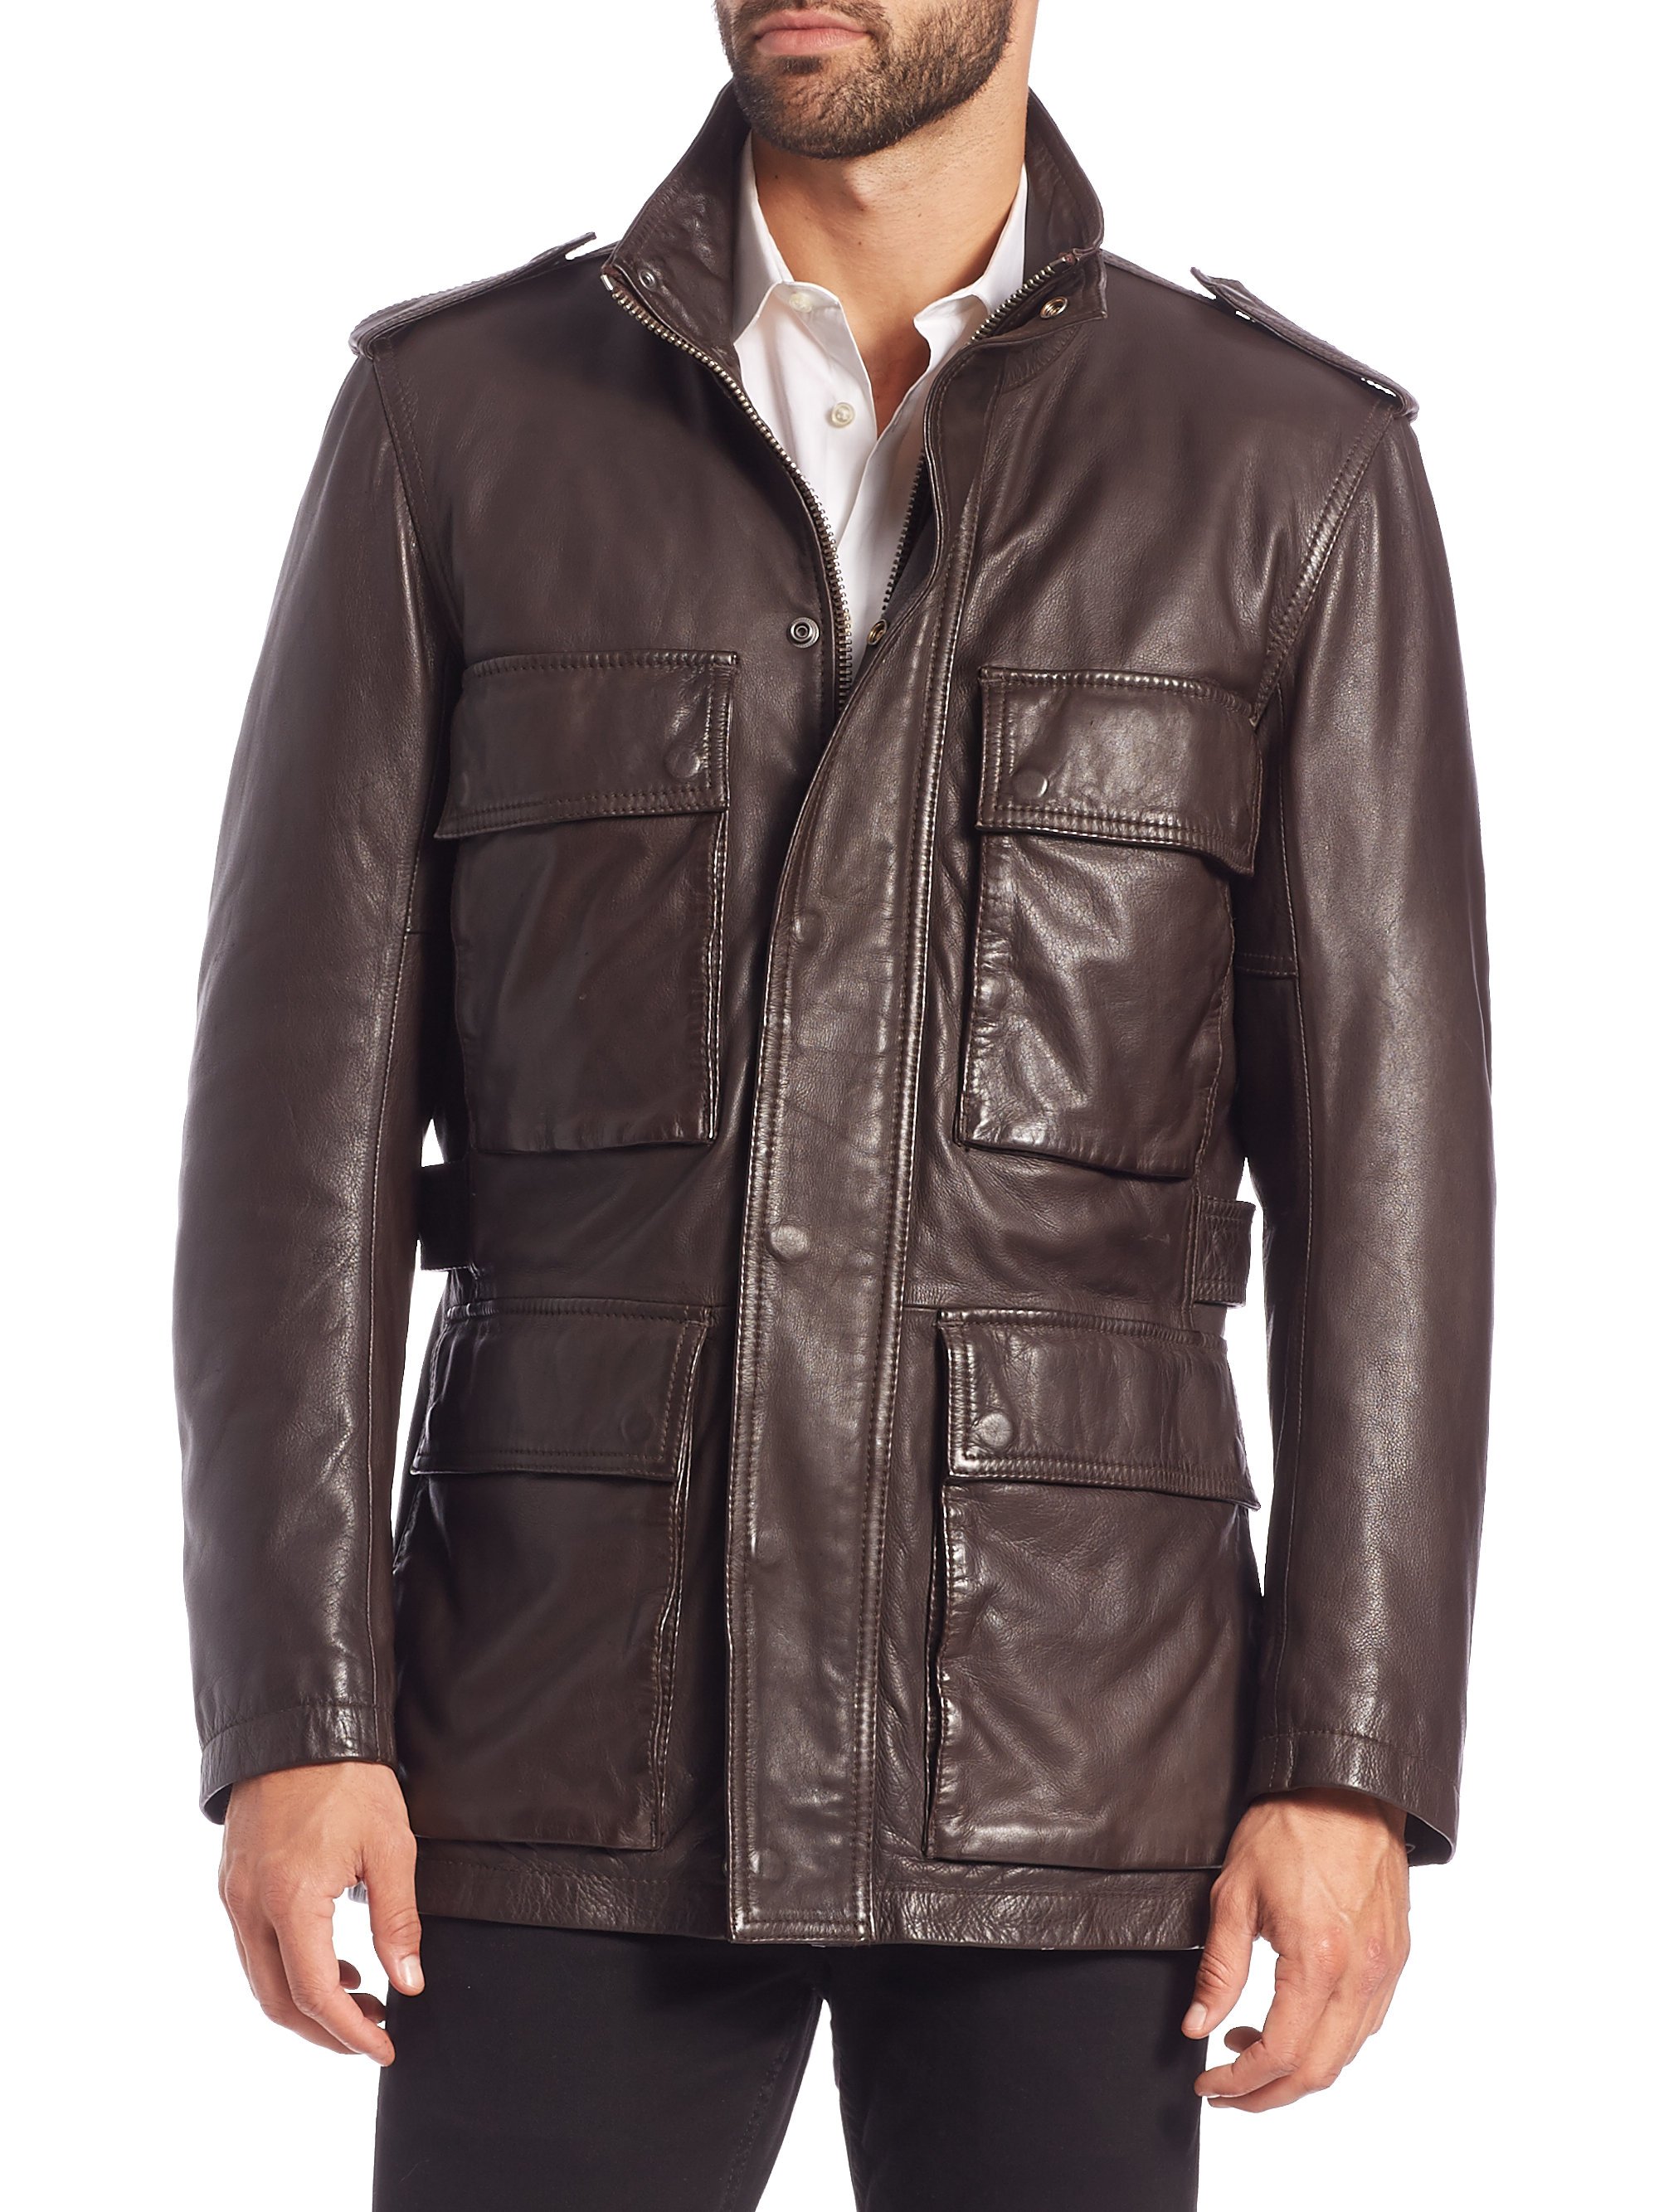 Andrew Marc Four-pocket Leather Jacket in Espresso (Brown) for Men - Lyst